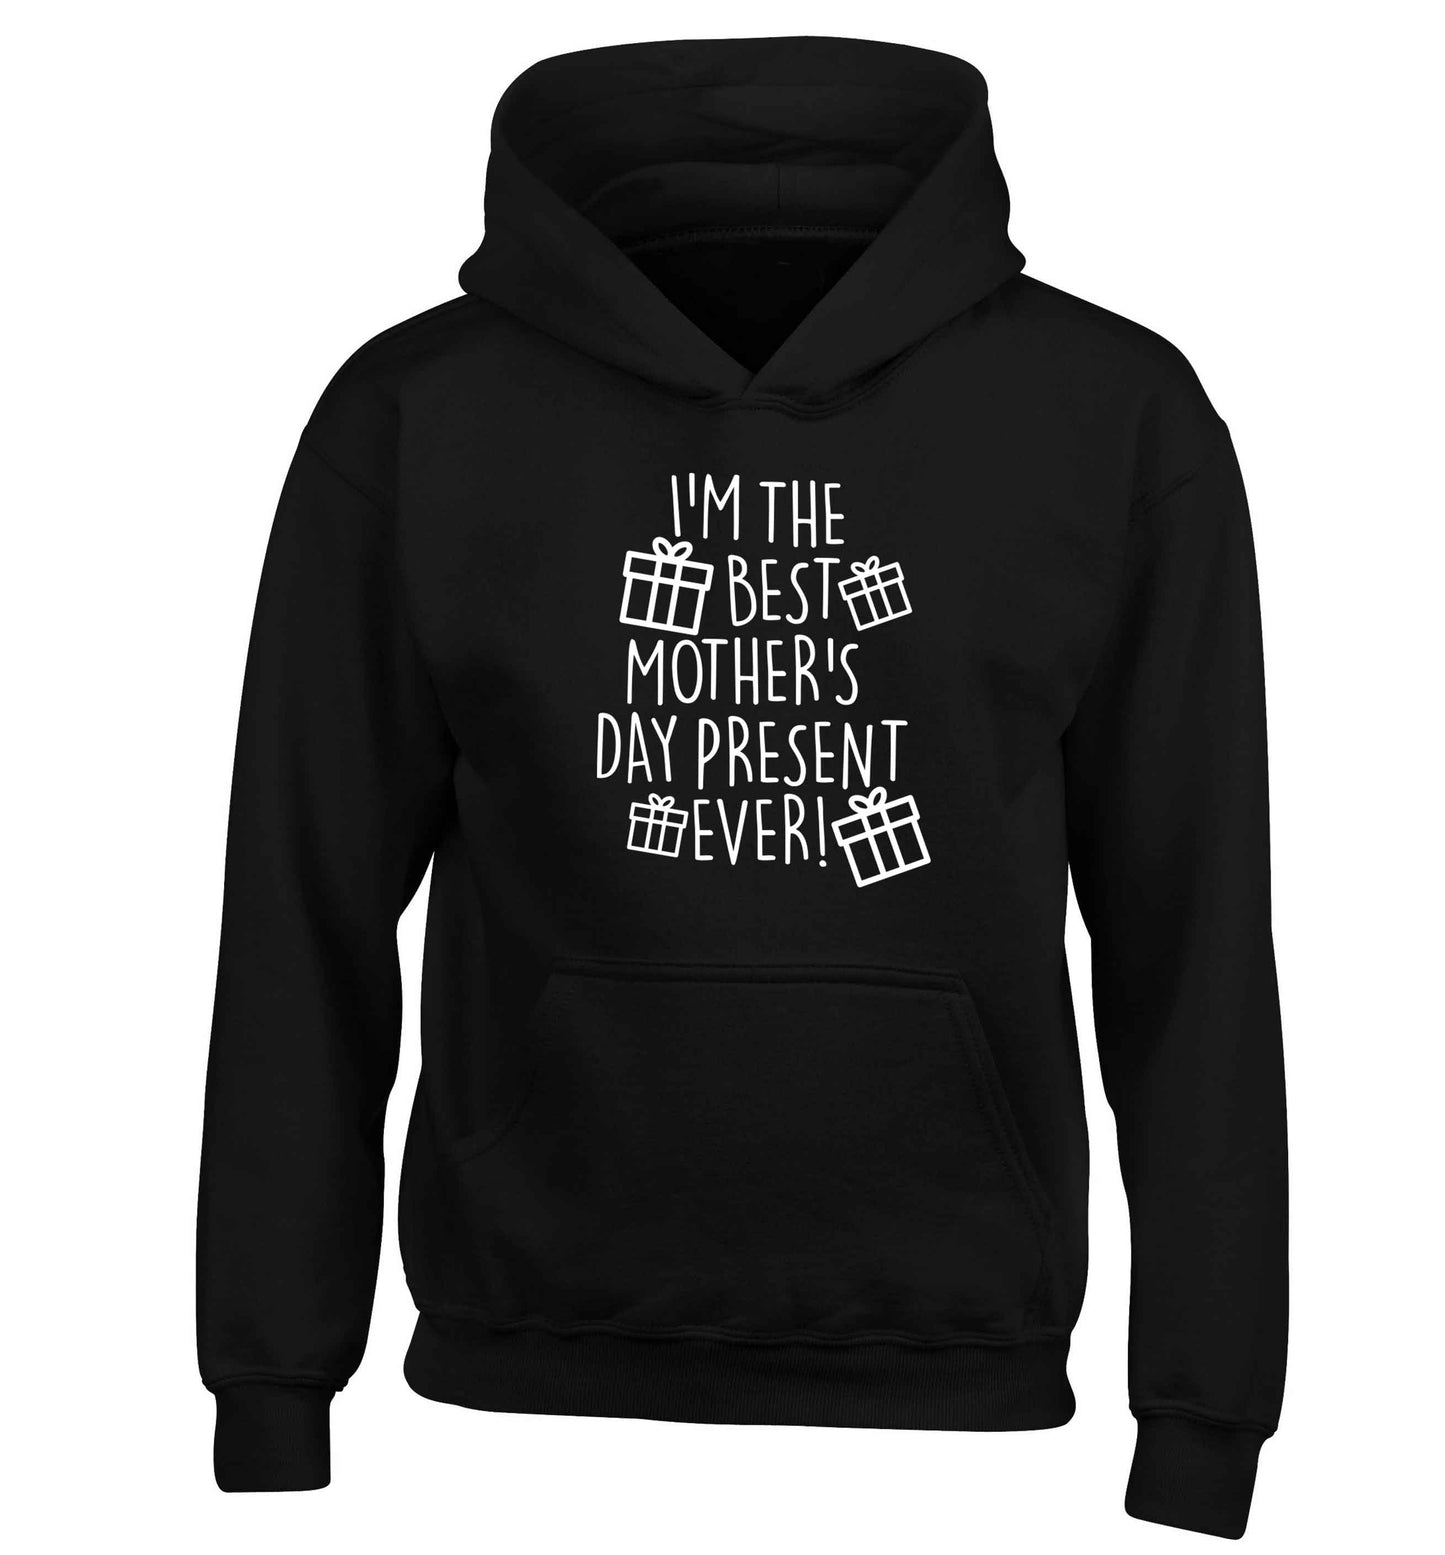 I'm the best mother's day present ever! children's black hoodie 12-13 Years